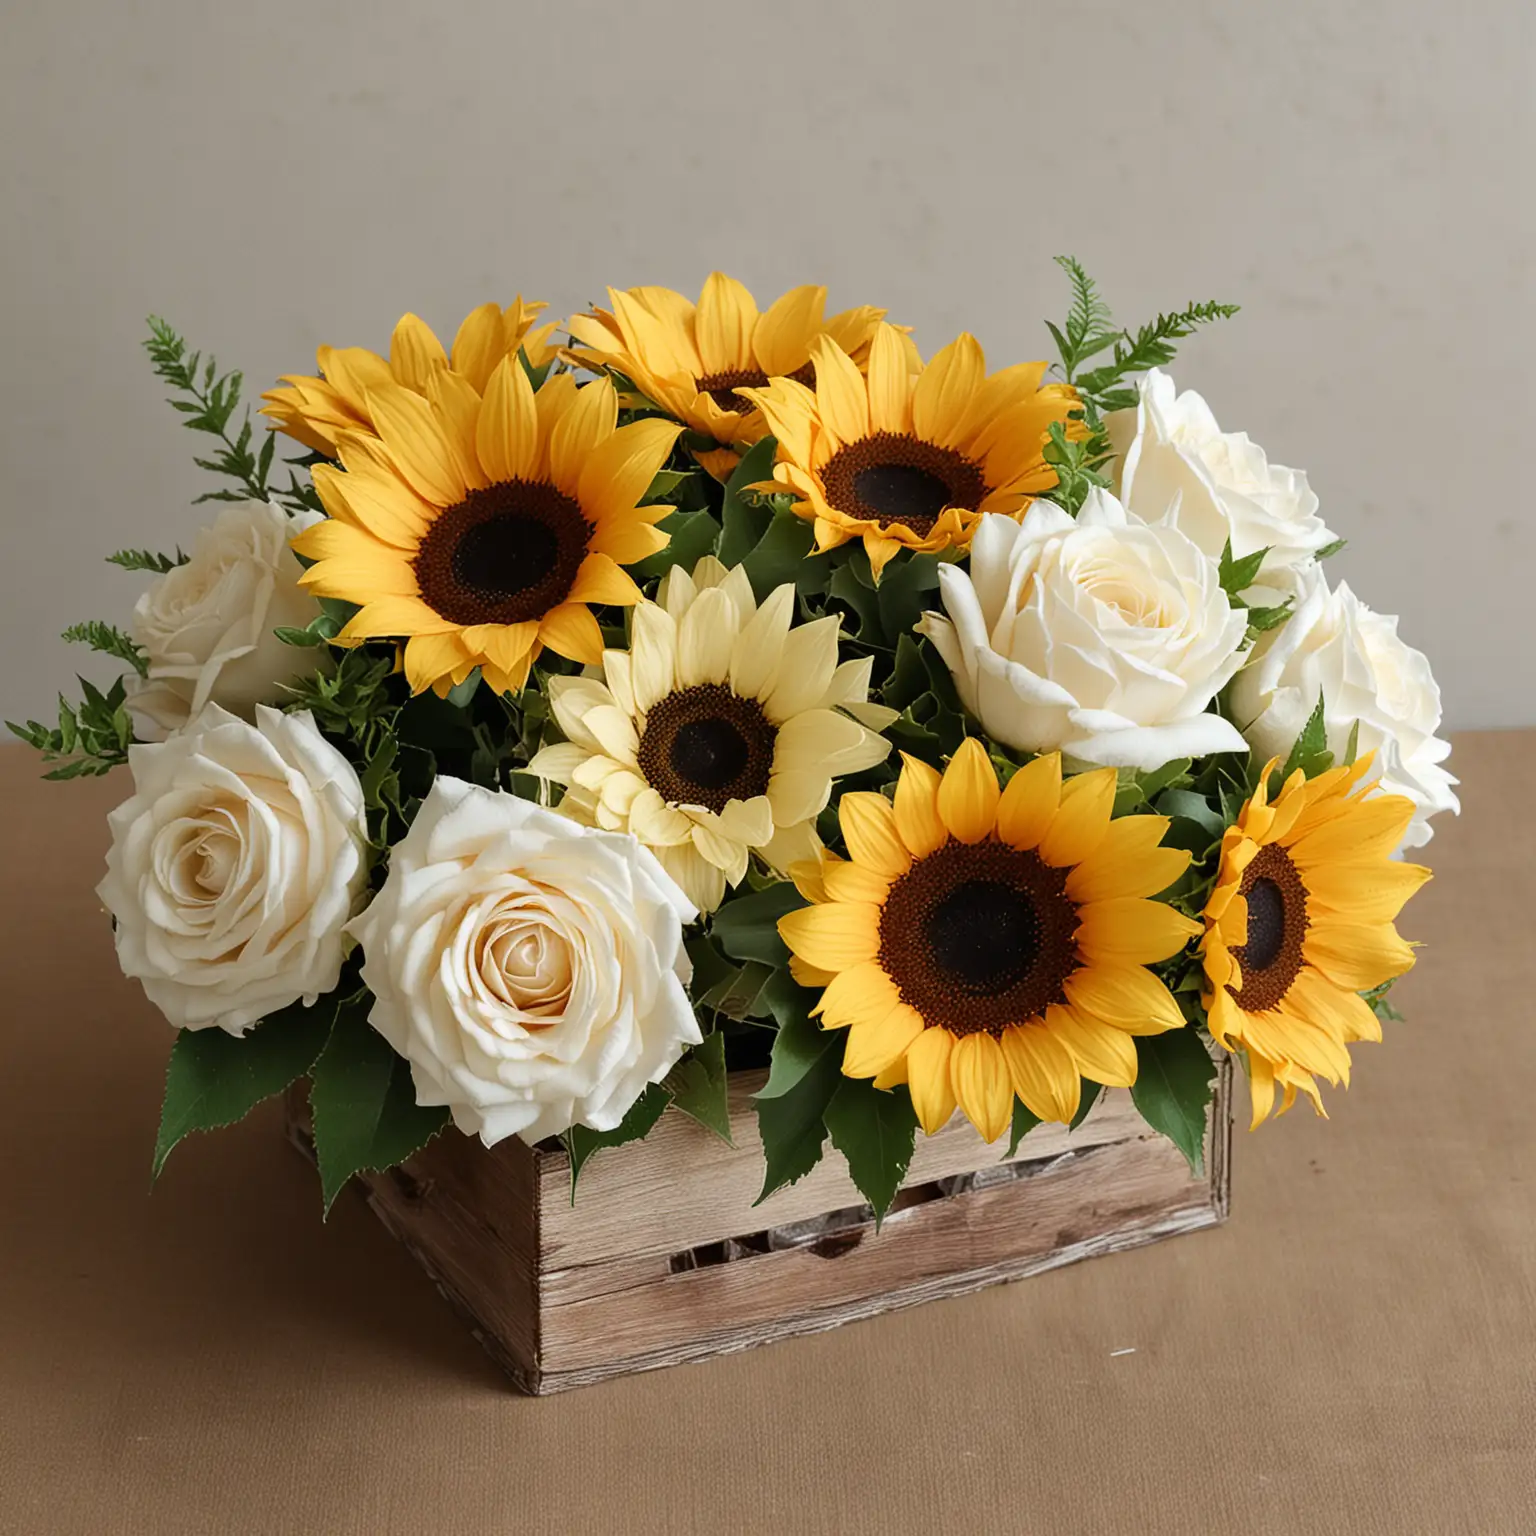 Rustic-Sunflower-and-Ivory-Rose-Centerpiece-Charming-Floral-Arrangement